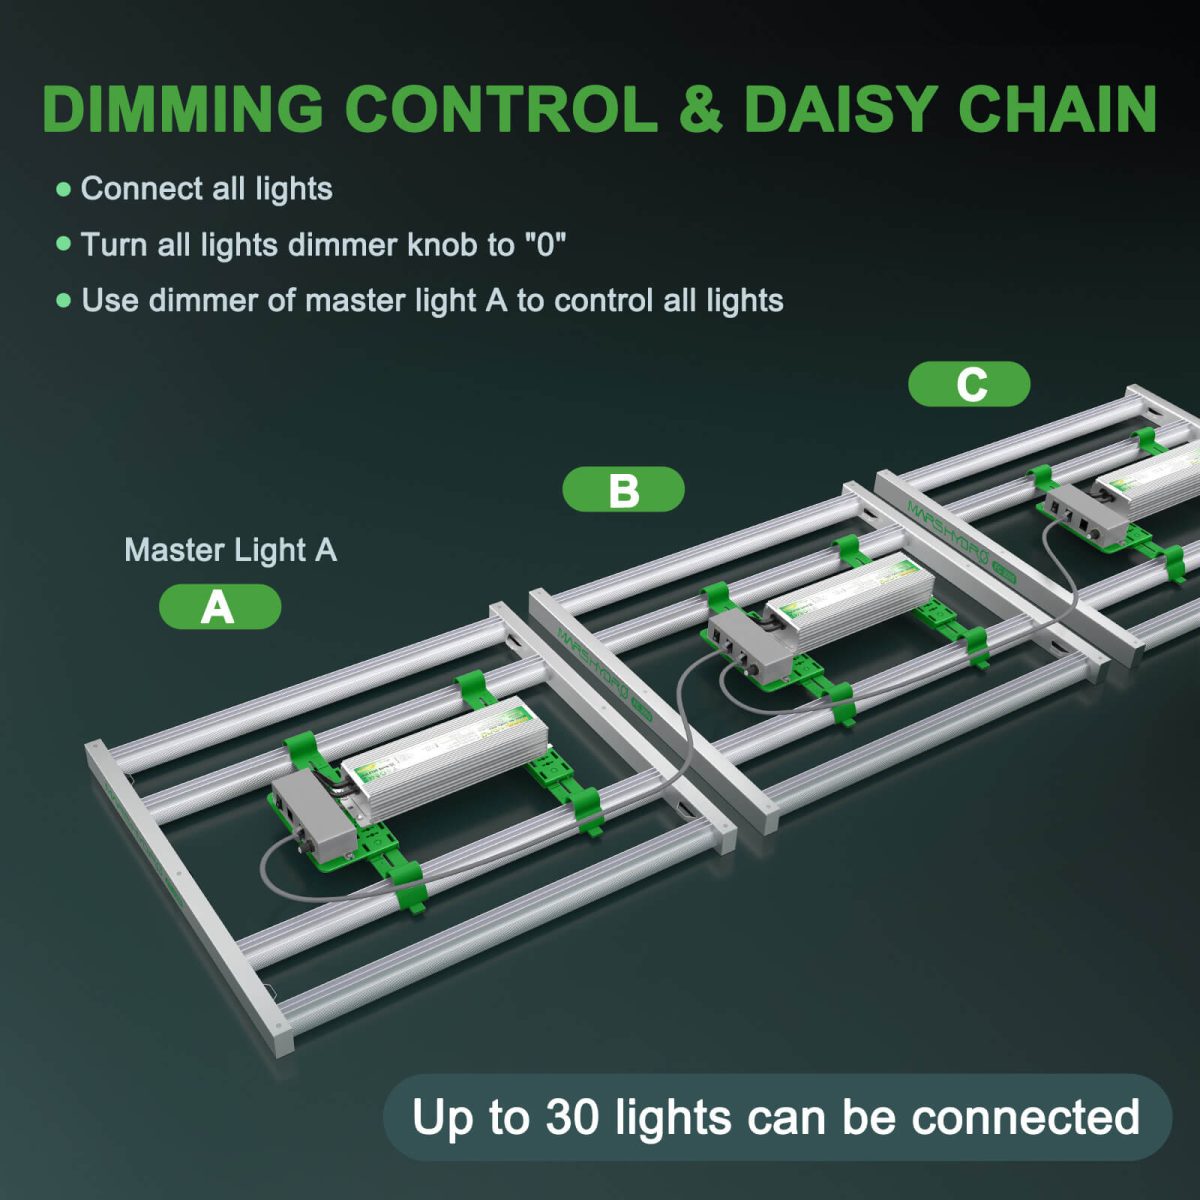 FC3000 LED grow lights support dimming daisy chain function to adjust light intensity of up to 30 LEDs with one dimmer.